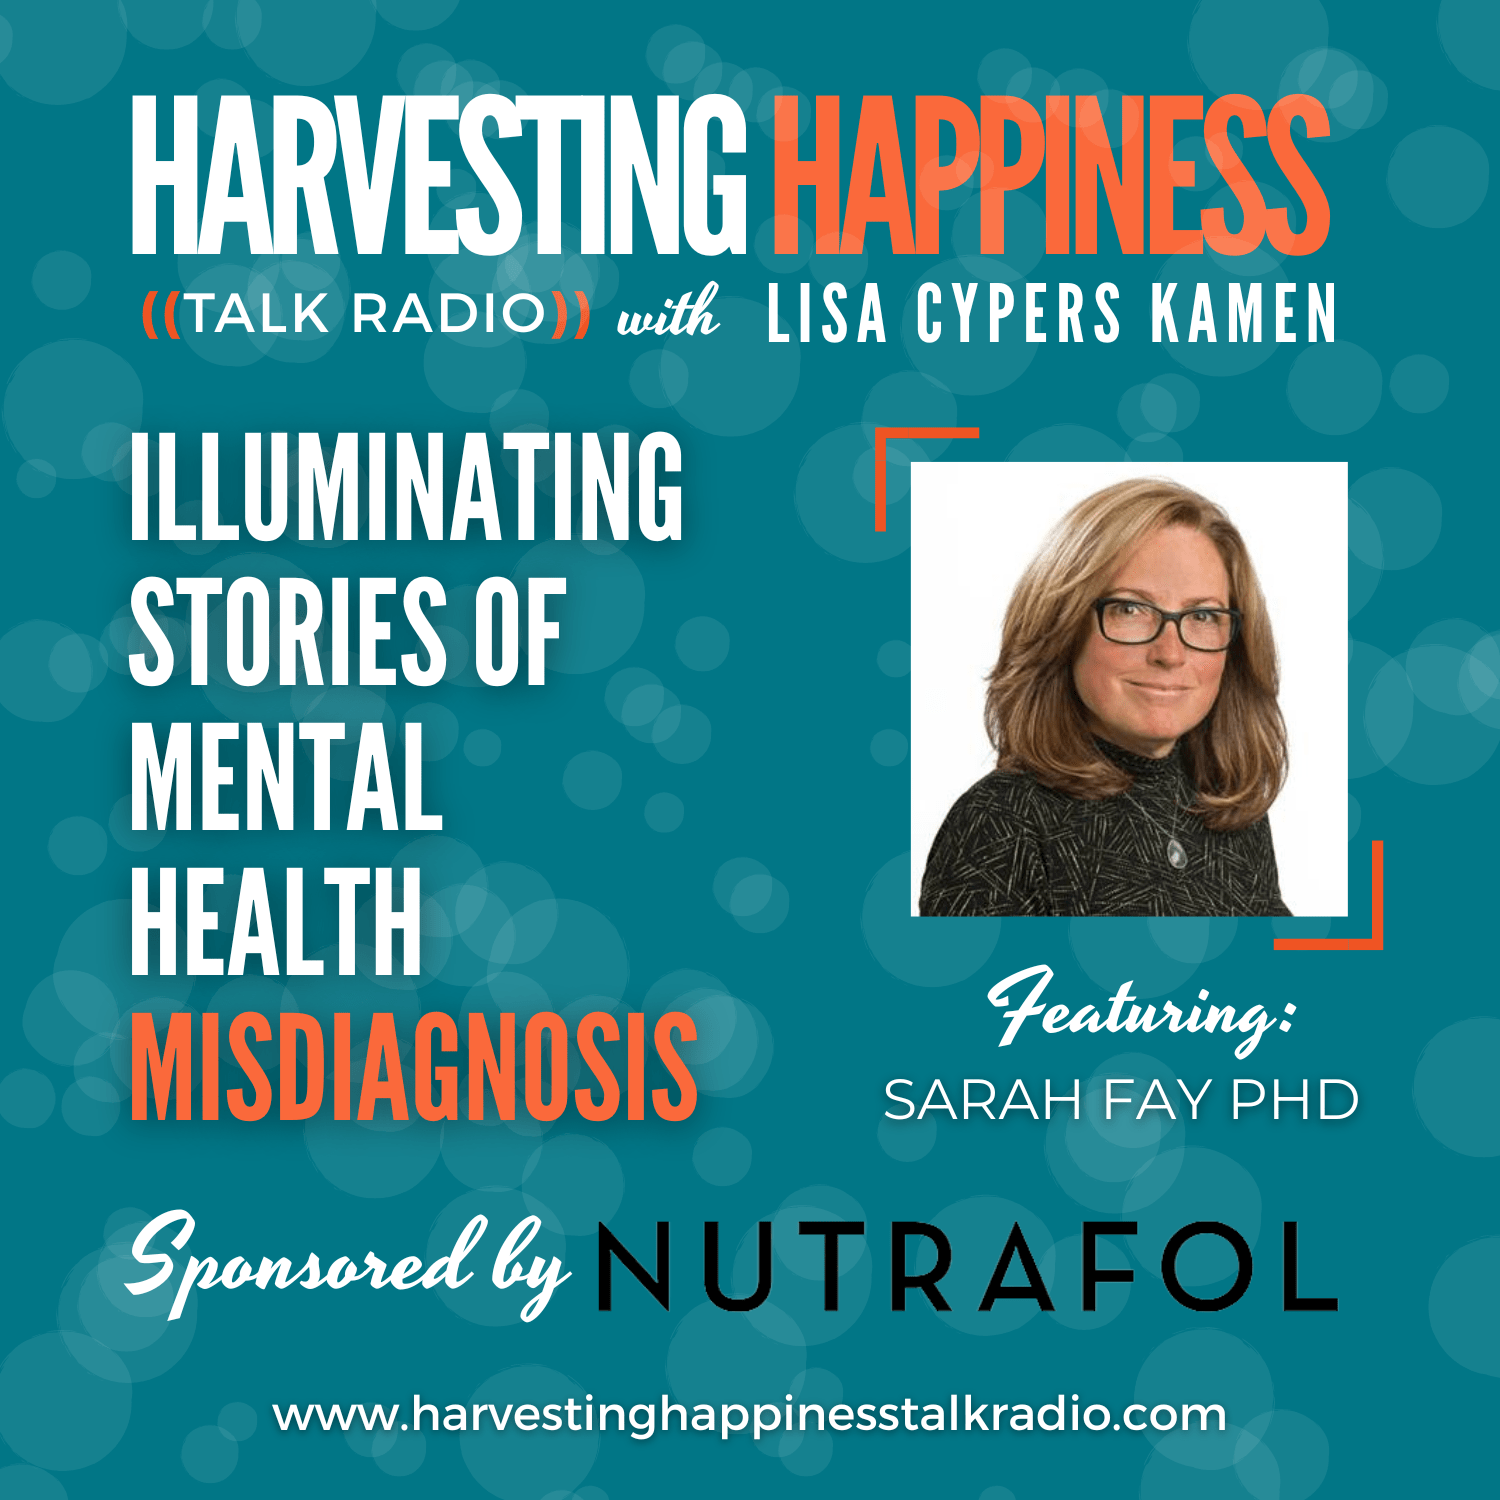 Podcast episode about mental health misdiagnoses with Sarah Fay and positive psychology expert Lisa Cypers Kamen, sponsored by Nutrafol